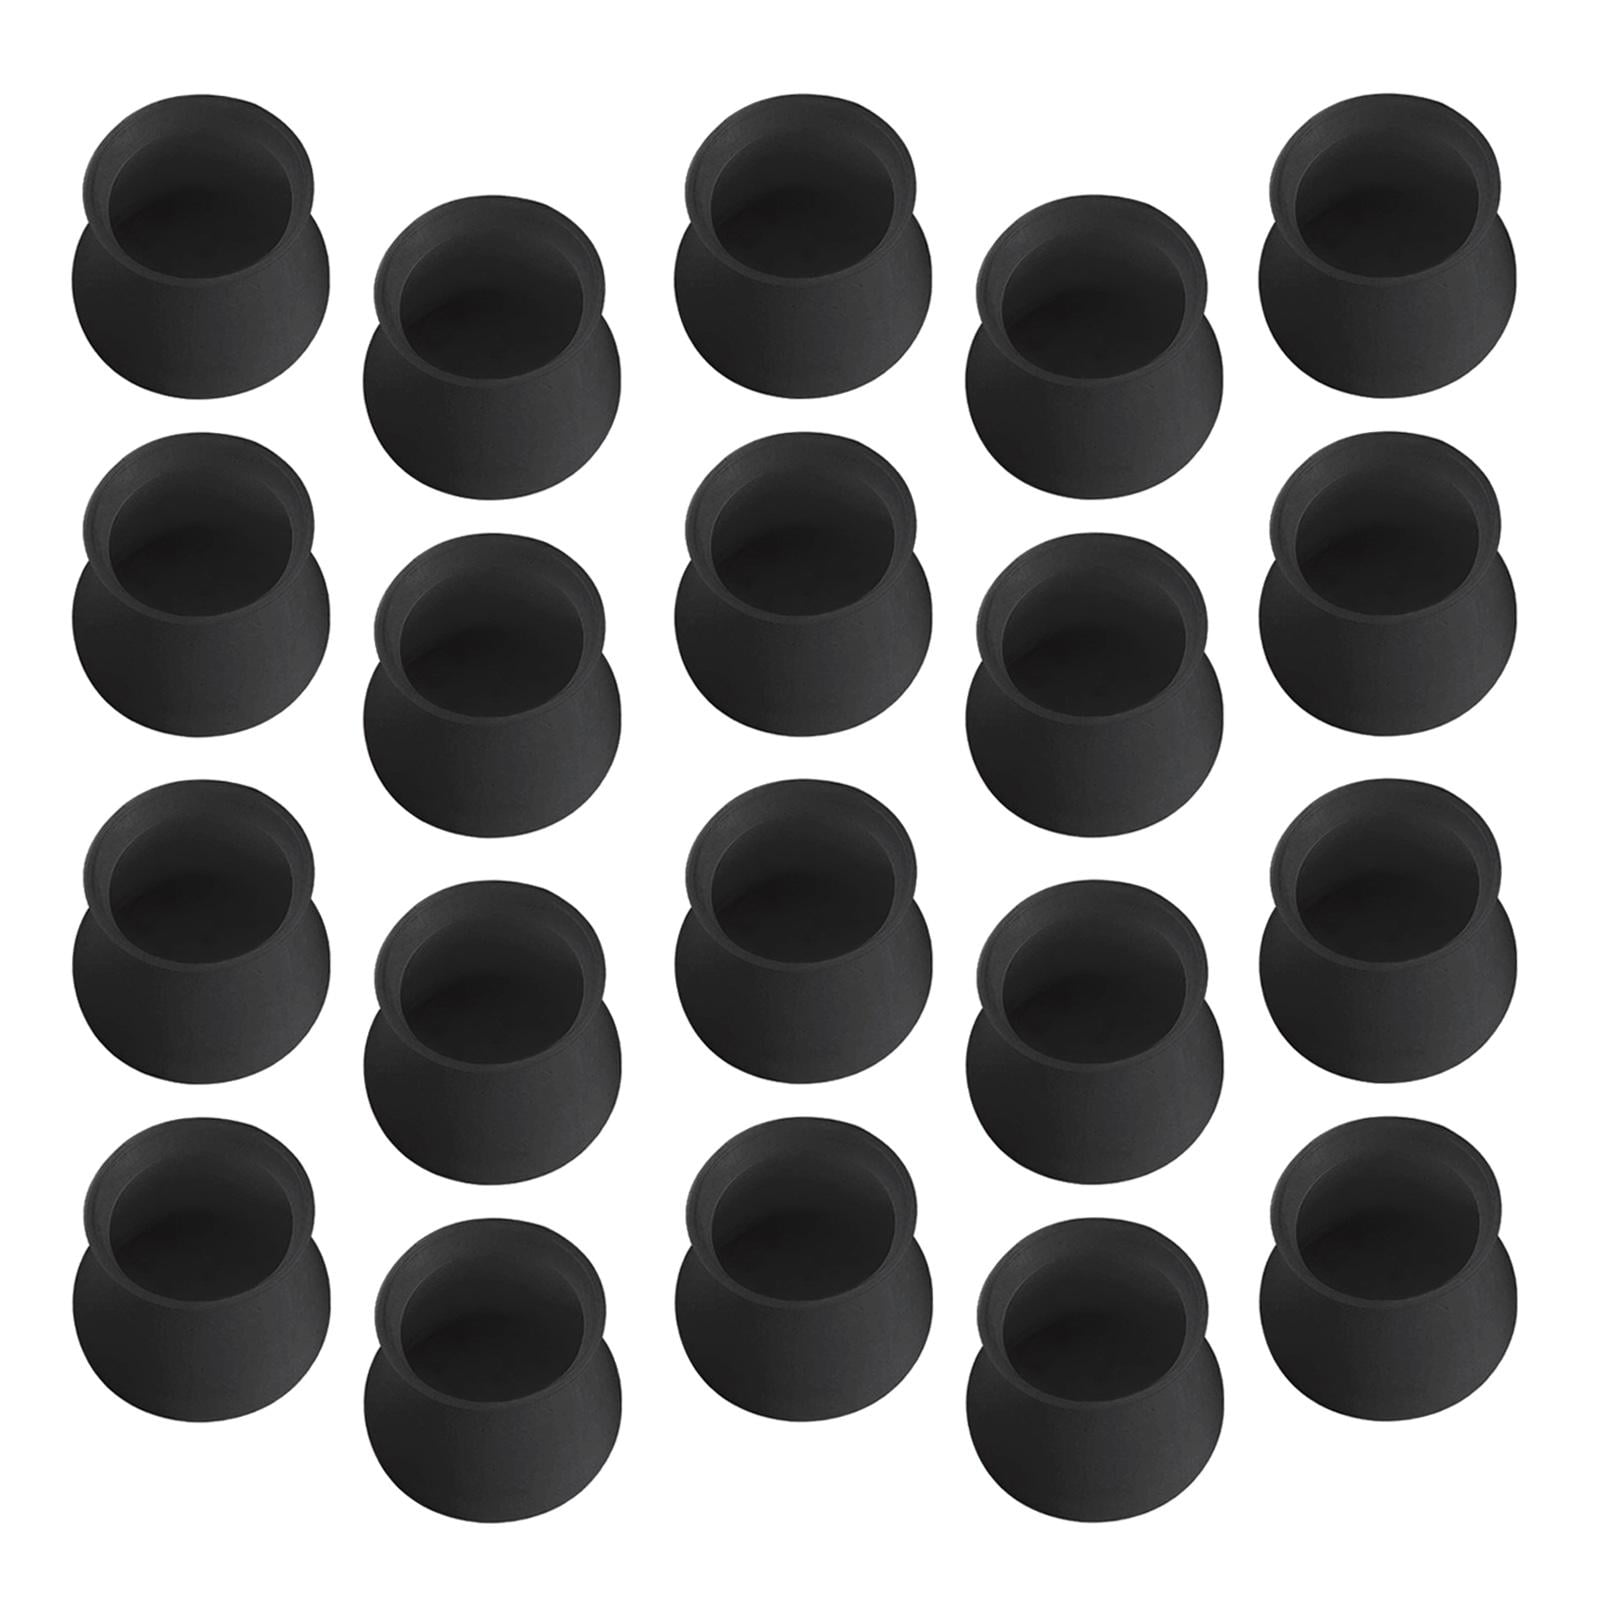 20PCS Chair Leg Silicone Cap Pad Furniture Table Feet Cover Floor Protector WH 